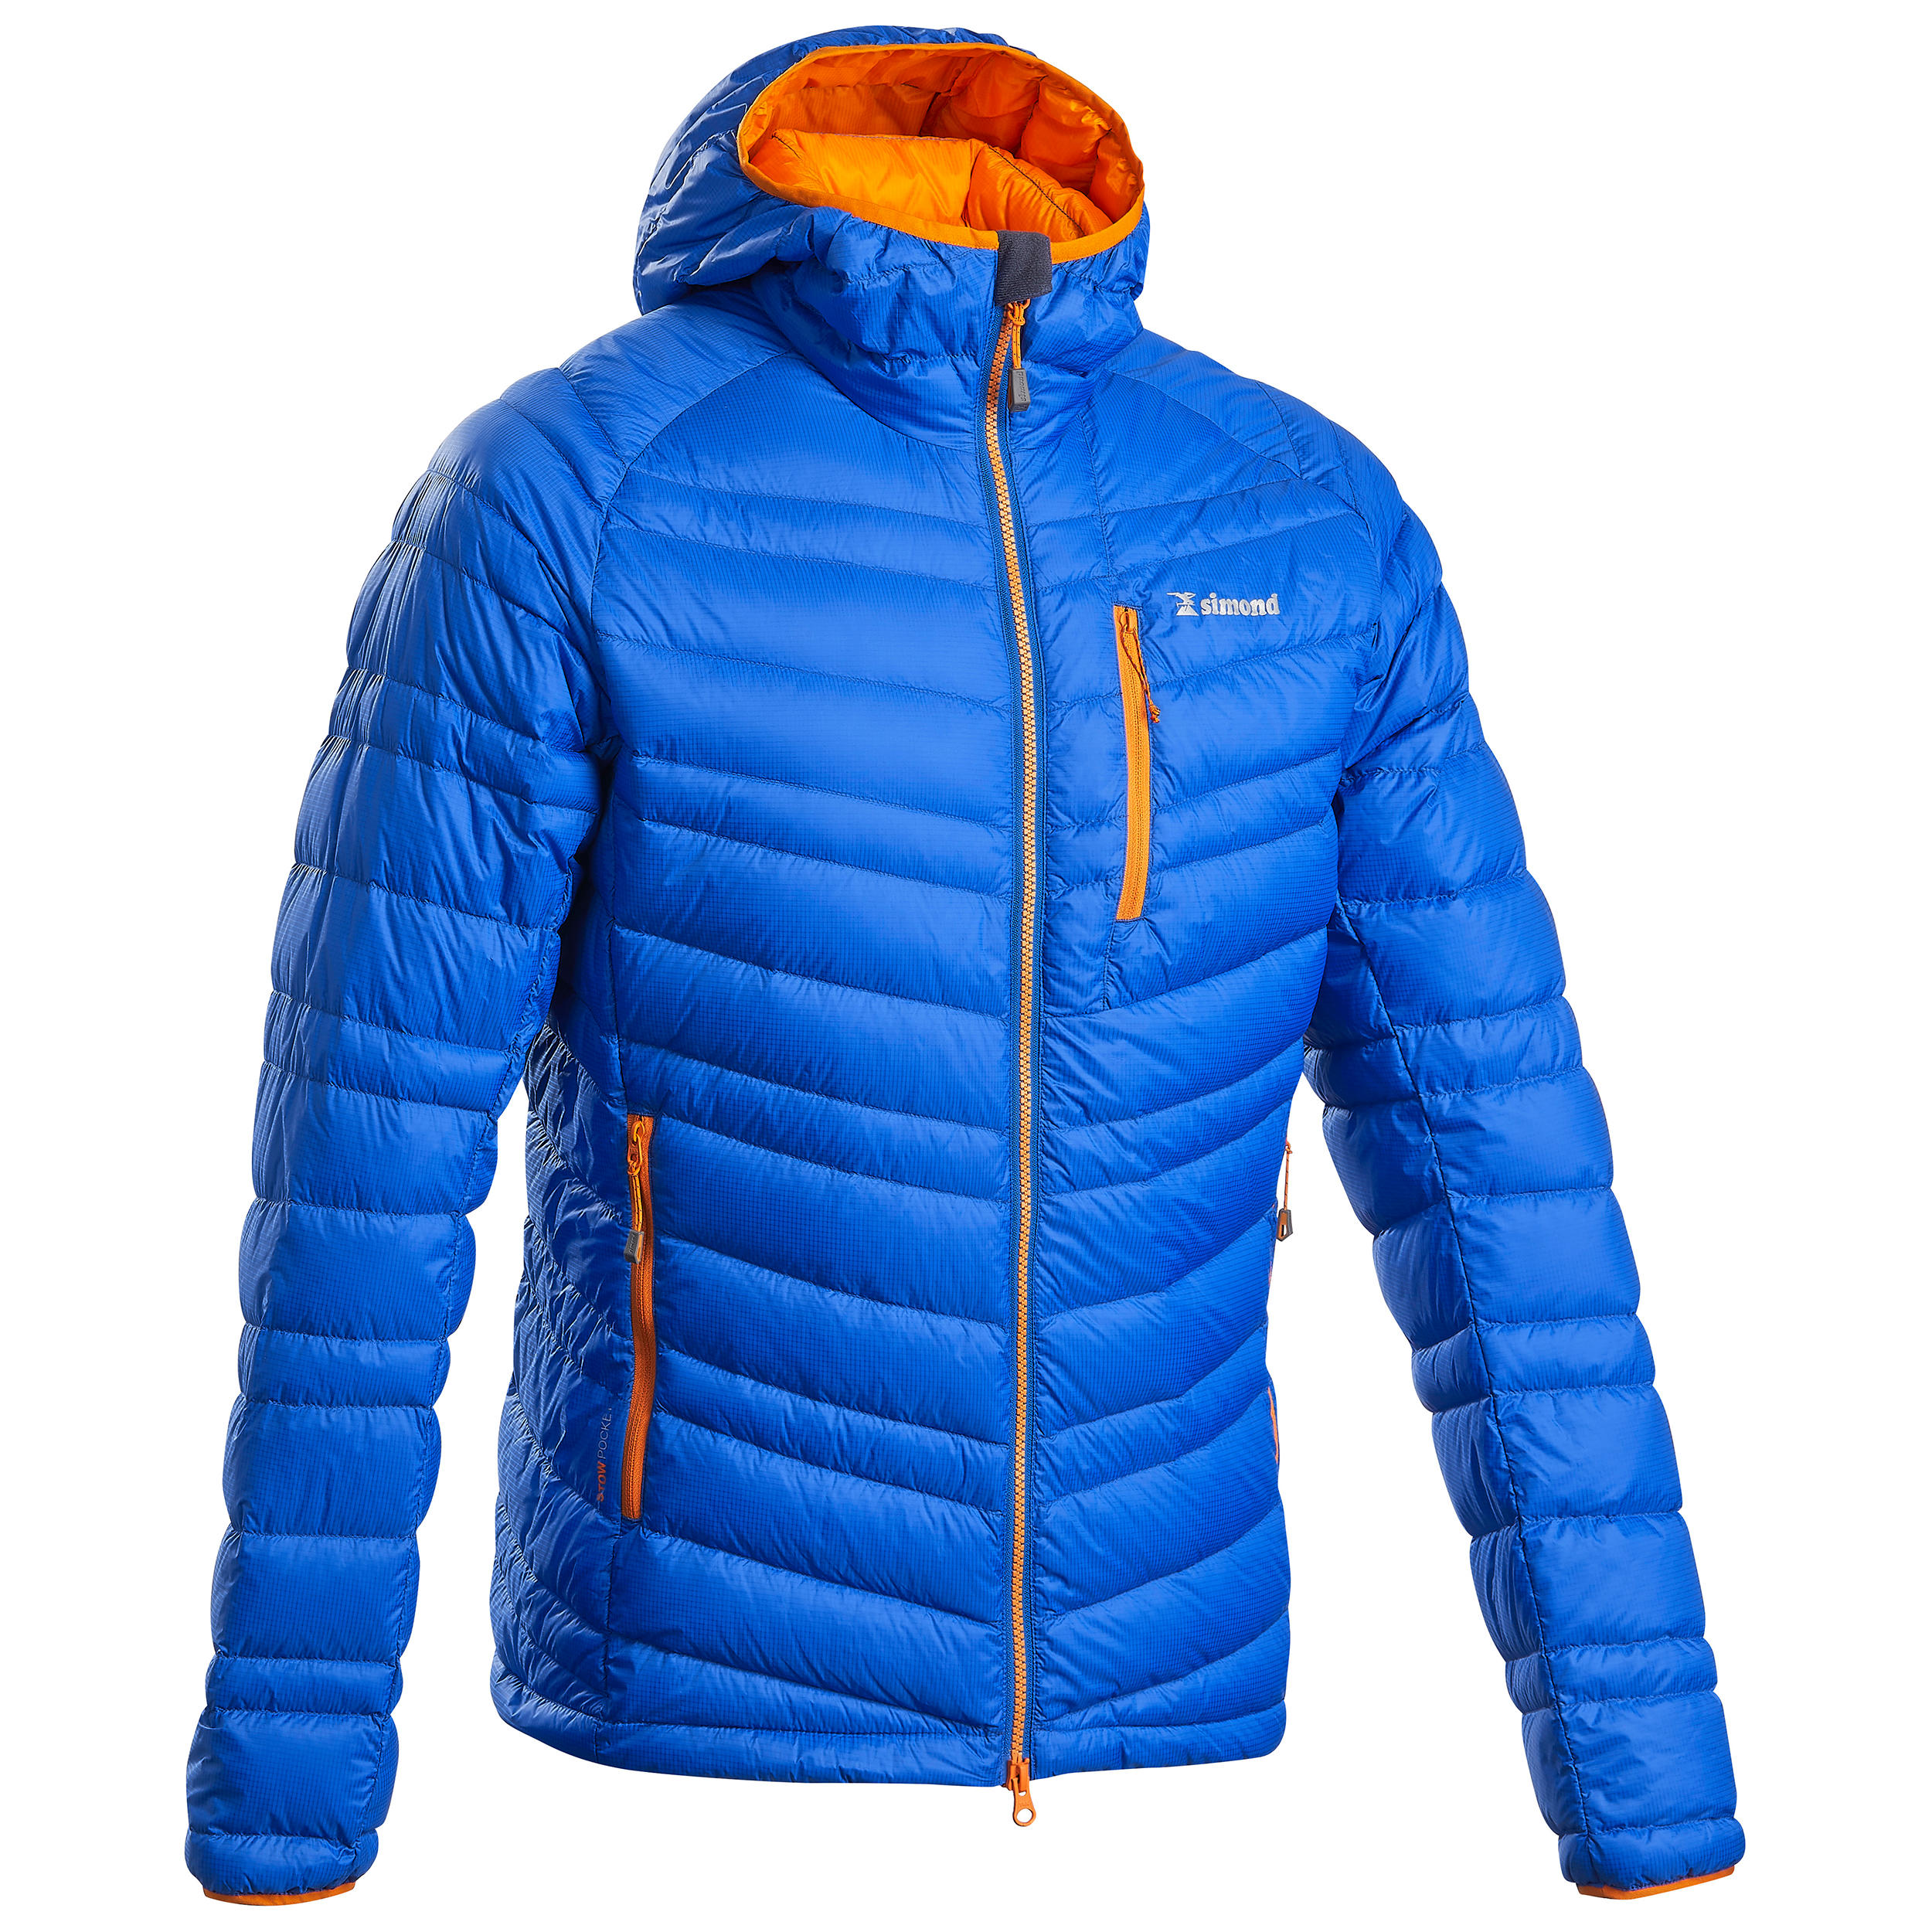 Men's Puffer Down Jacket for -10 